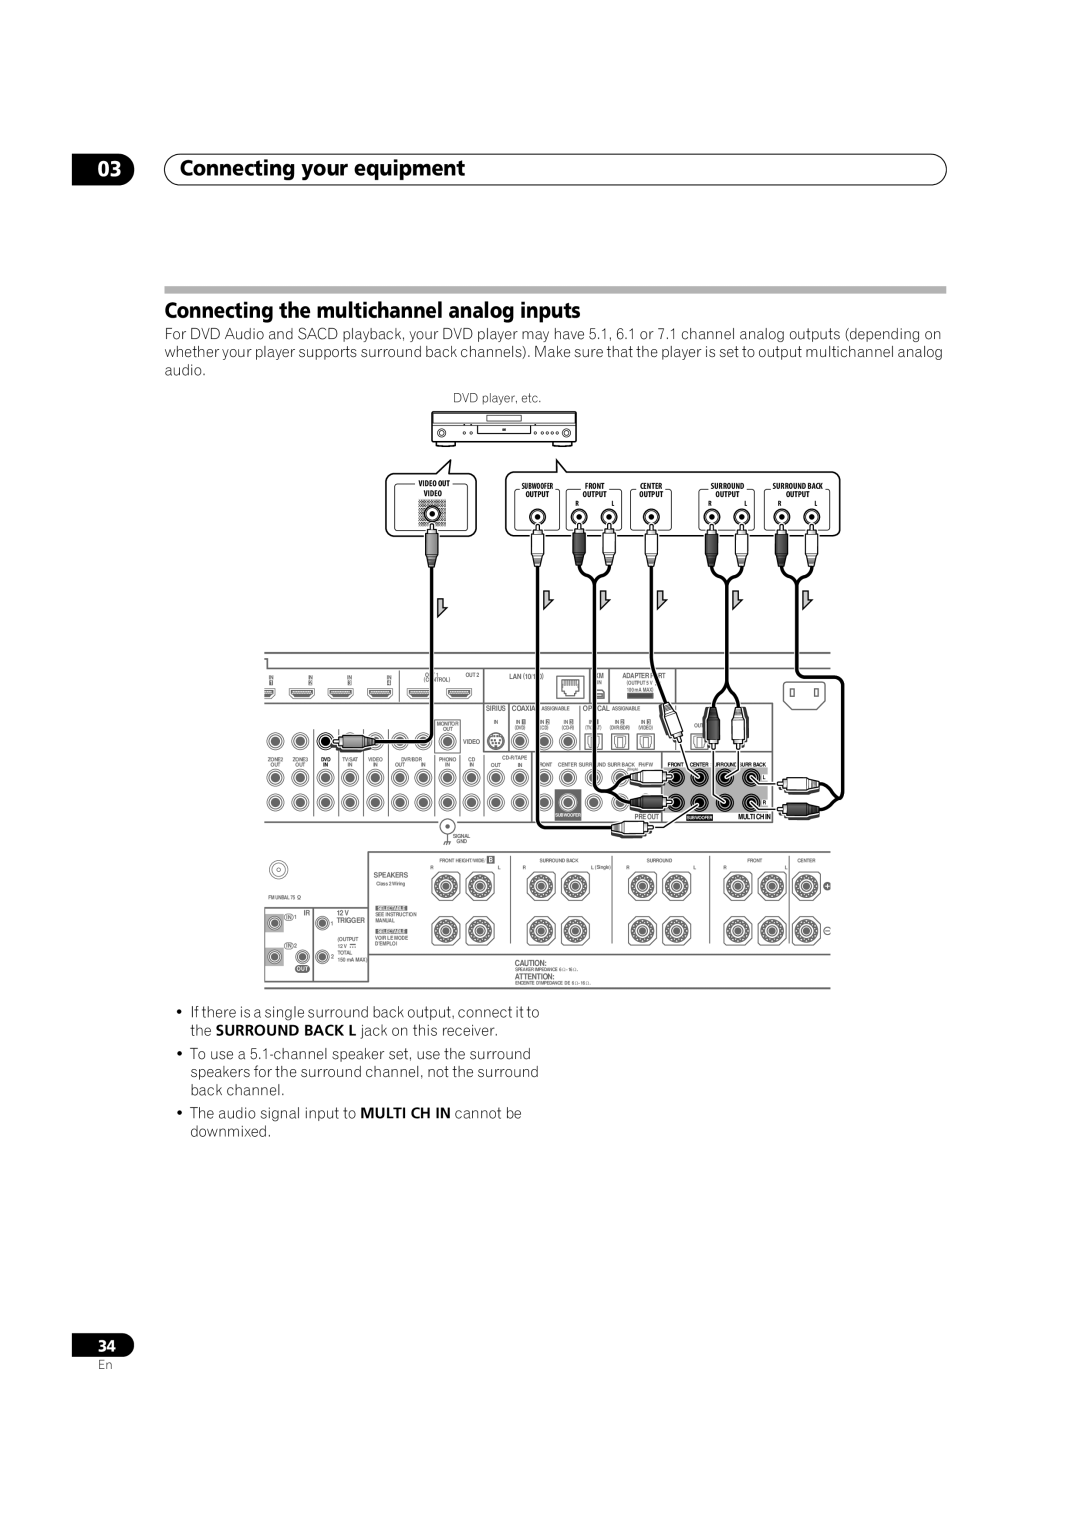 Pioneer SC-35 manual Connecting the multichannel analog inputs, 03Connecting your equipment 